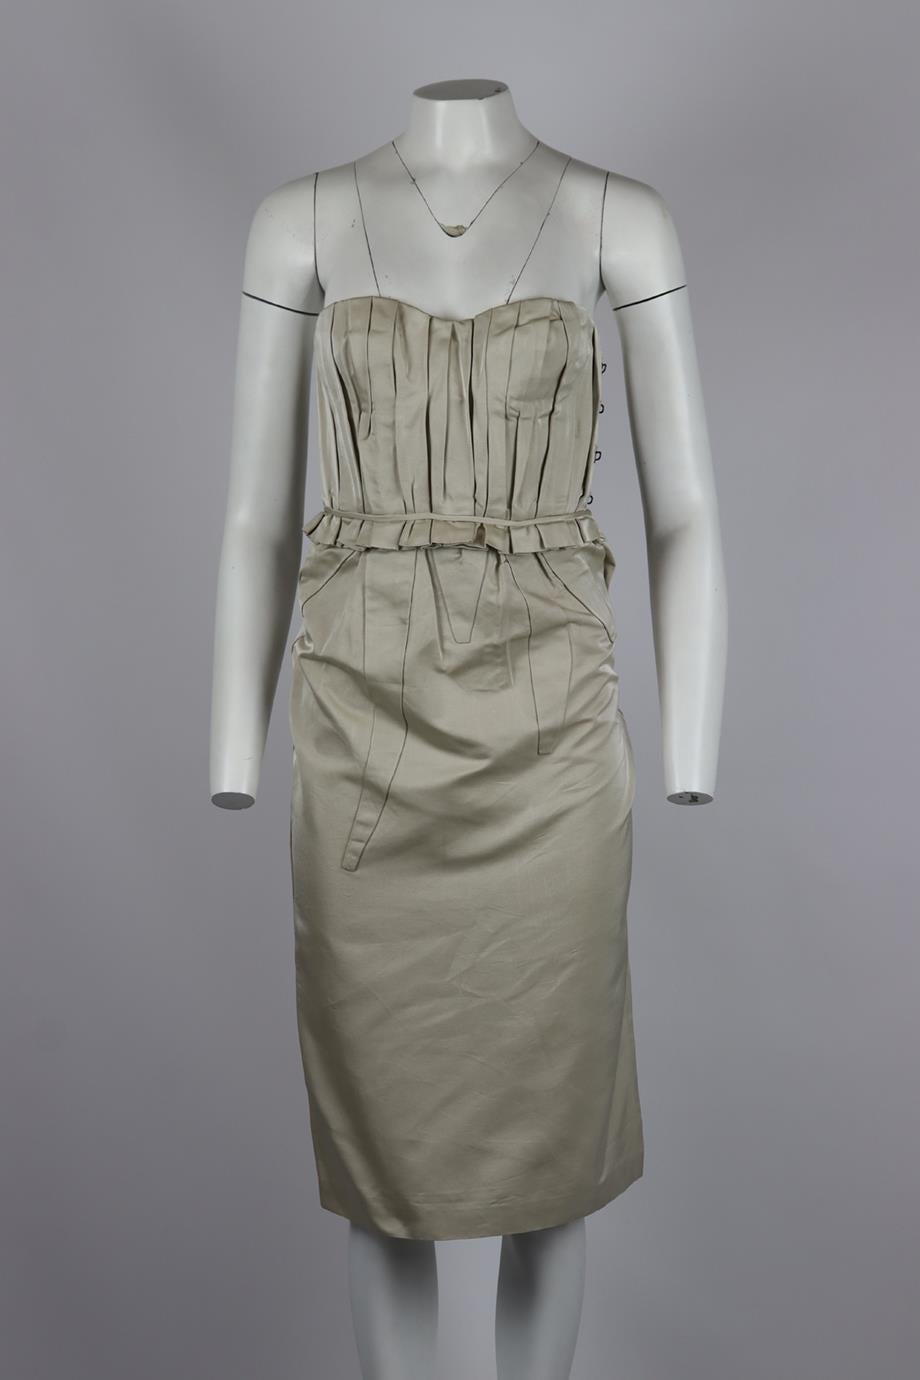 Bottega Veneta strapless ruched cotton and silk blend midi dress. Beige. Sleeveless, bandeau. Hook and eye fastening at side. 60% Cotton, 40% silk; lining: 100% cotton. Size: IT 40 (UK 8, US 4, FR 36). Bust: 28.8 in. Waist: 27.8 in. Hips: 35 in.